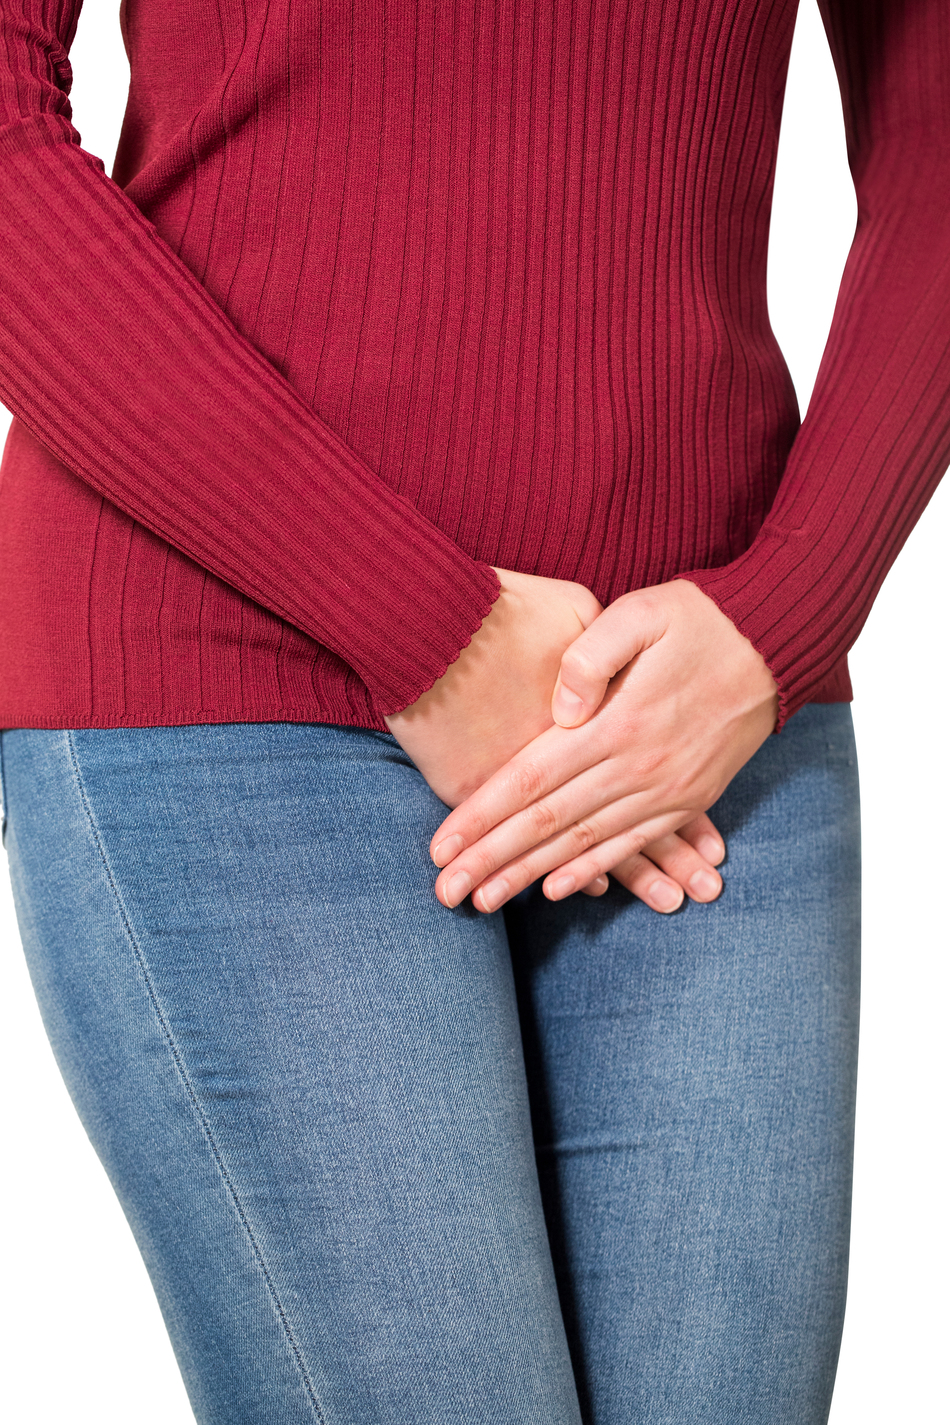 Could Your Frequent Need to Go Be an Overactive Bladder?